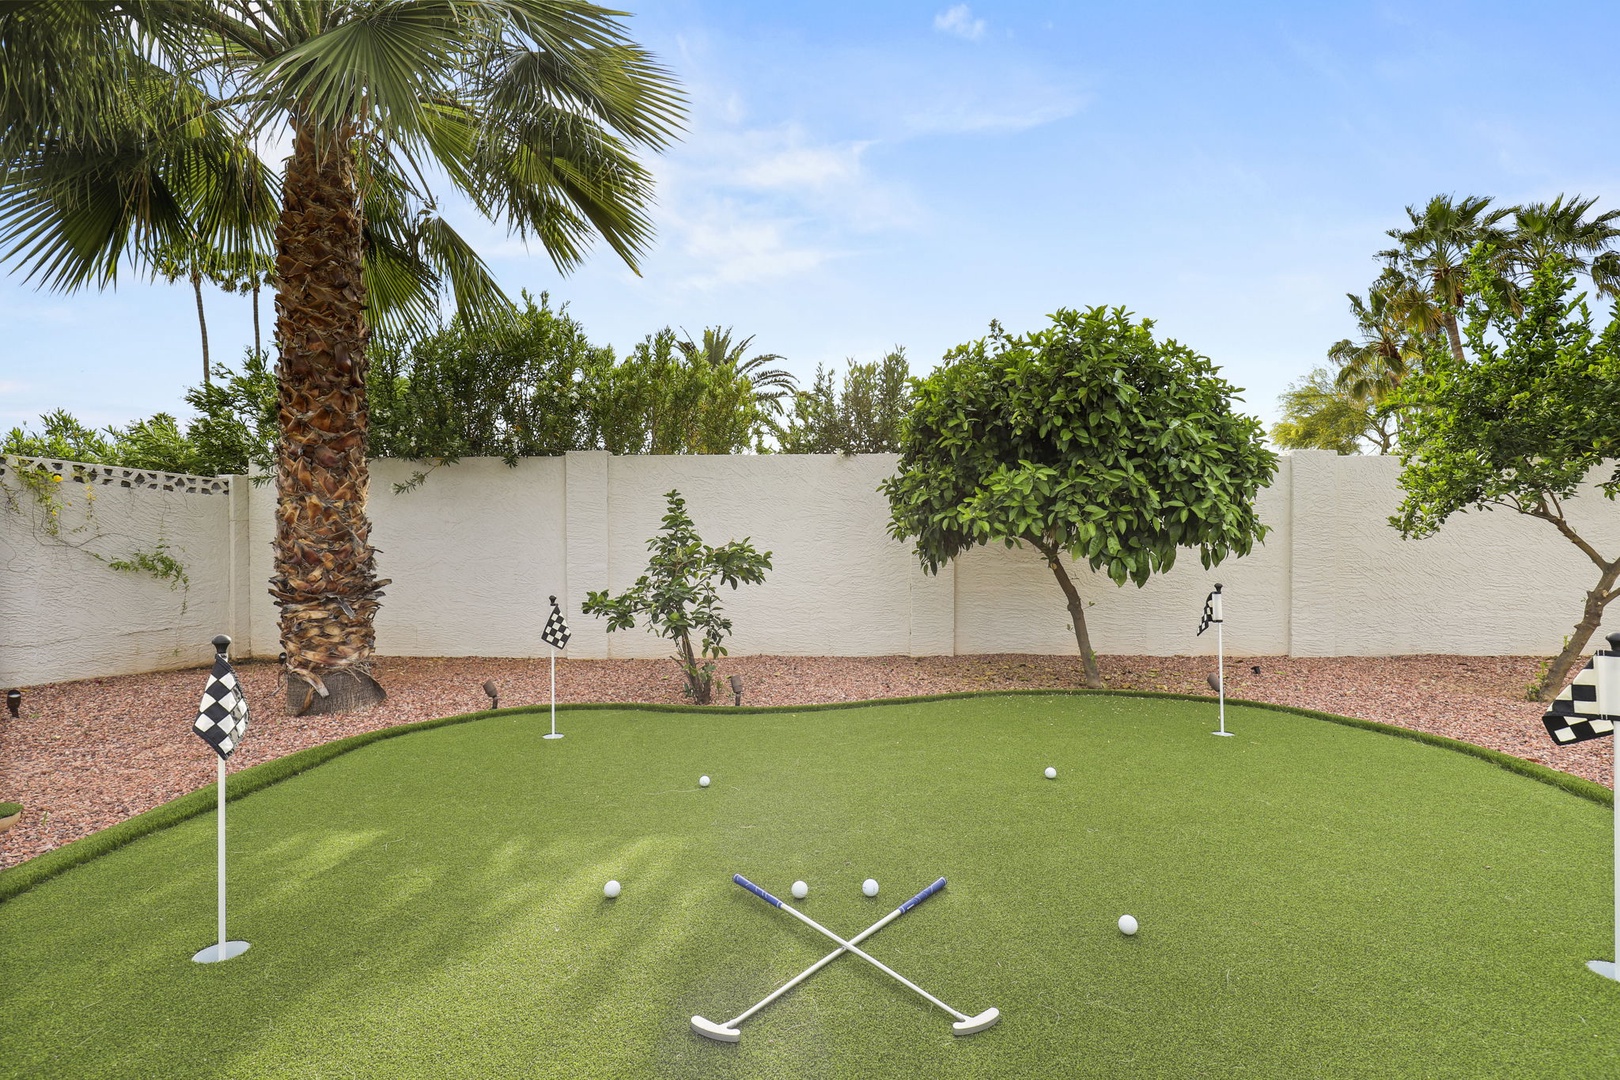 Practice your short game on the backyard putting and chipping green!